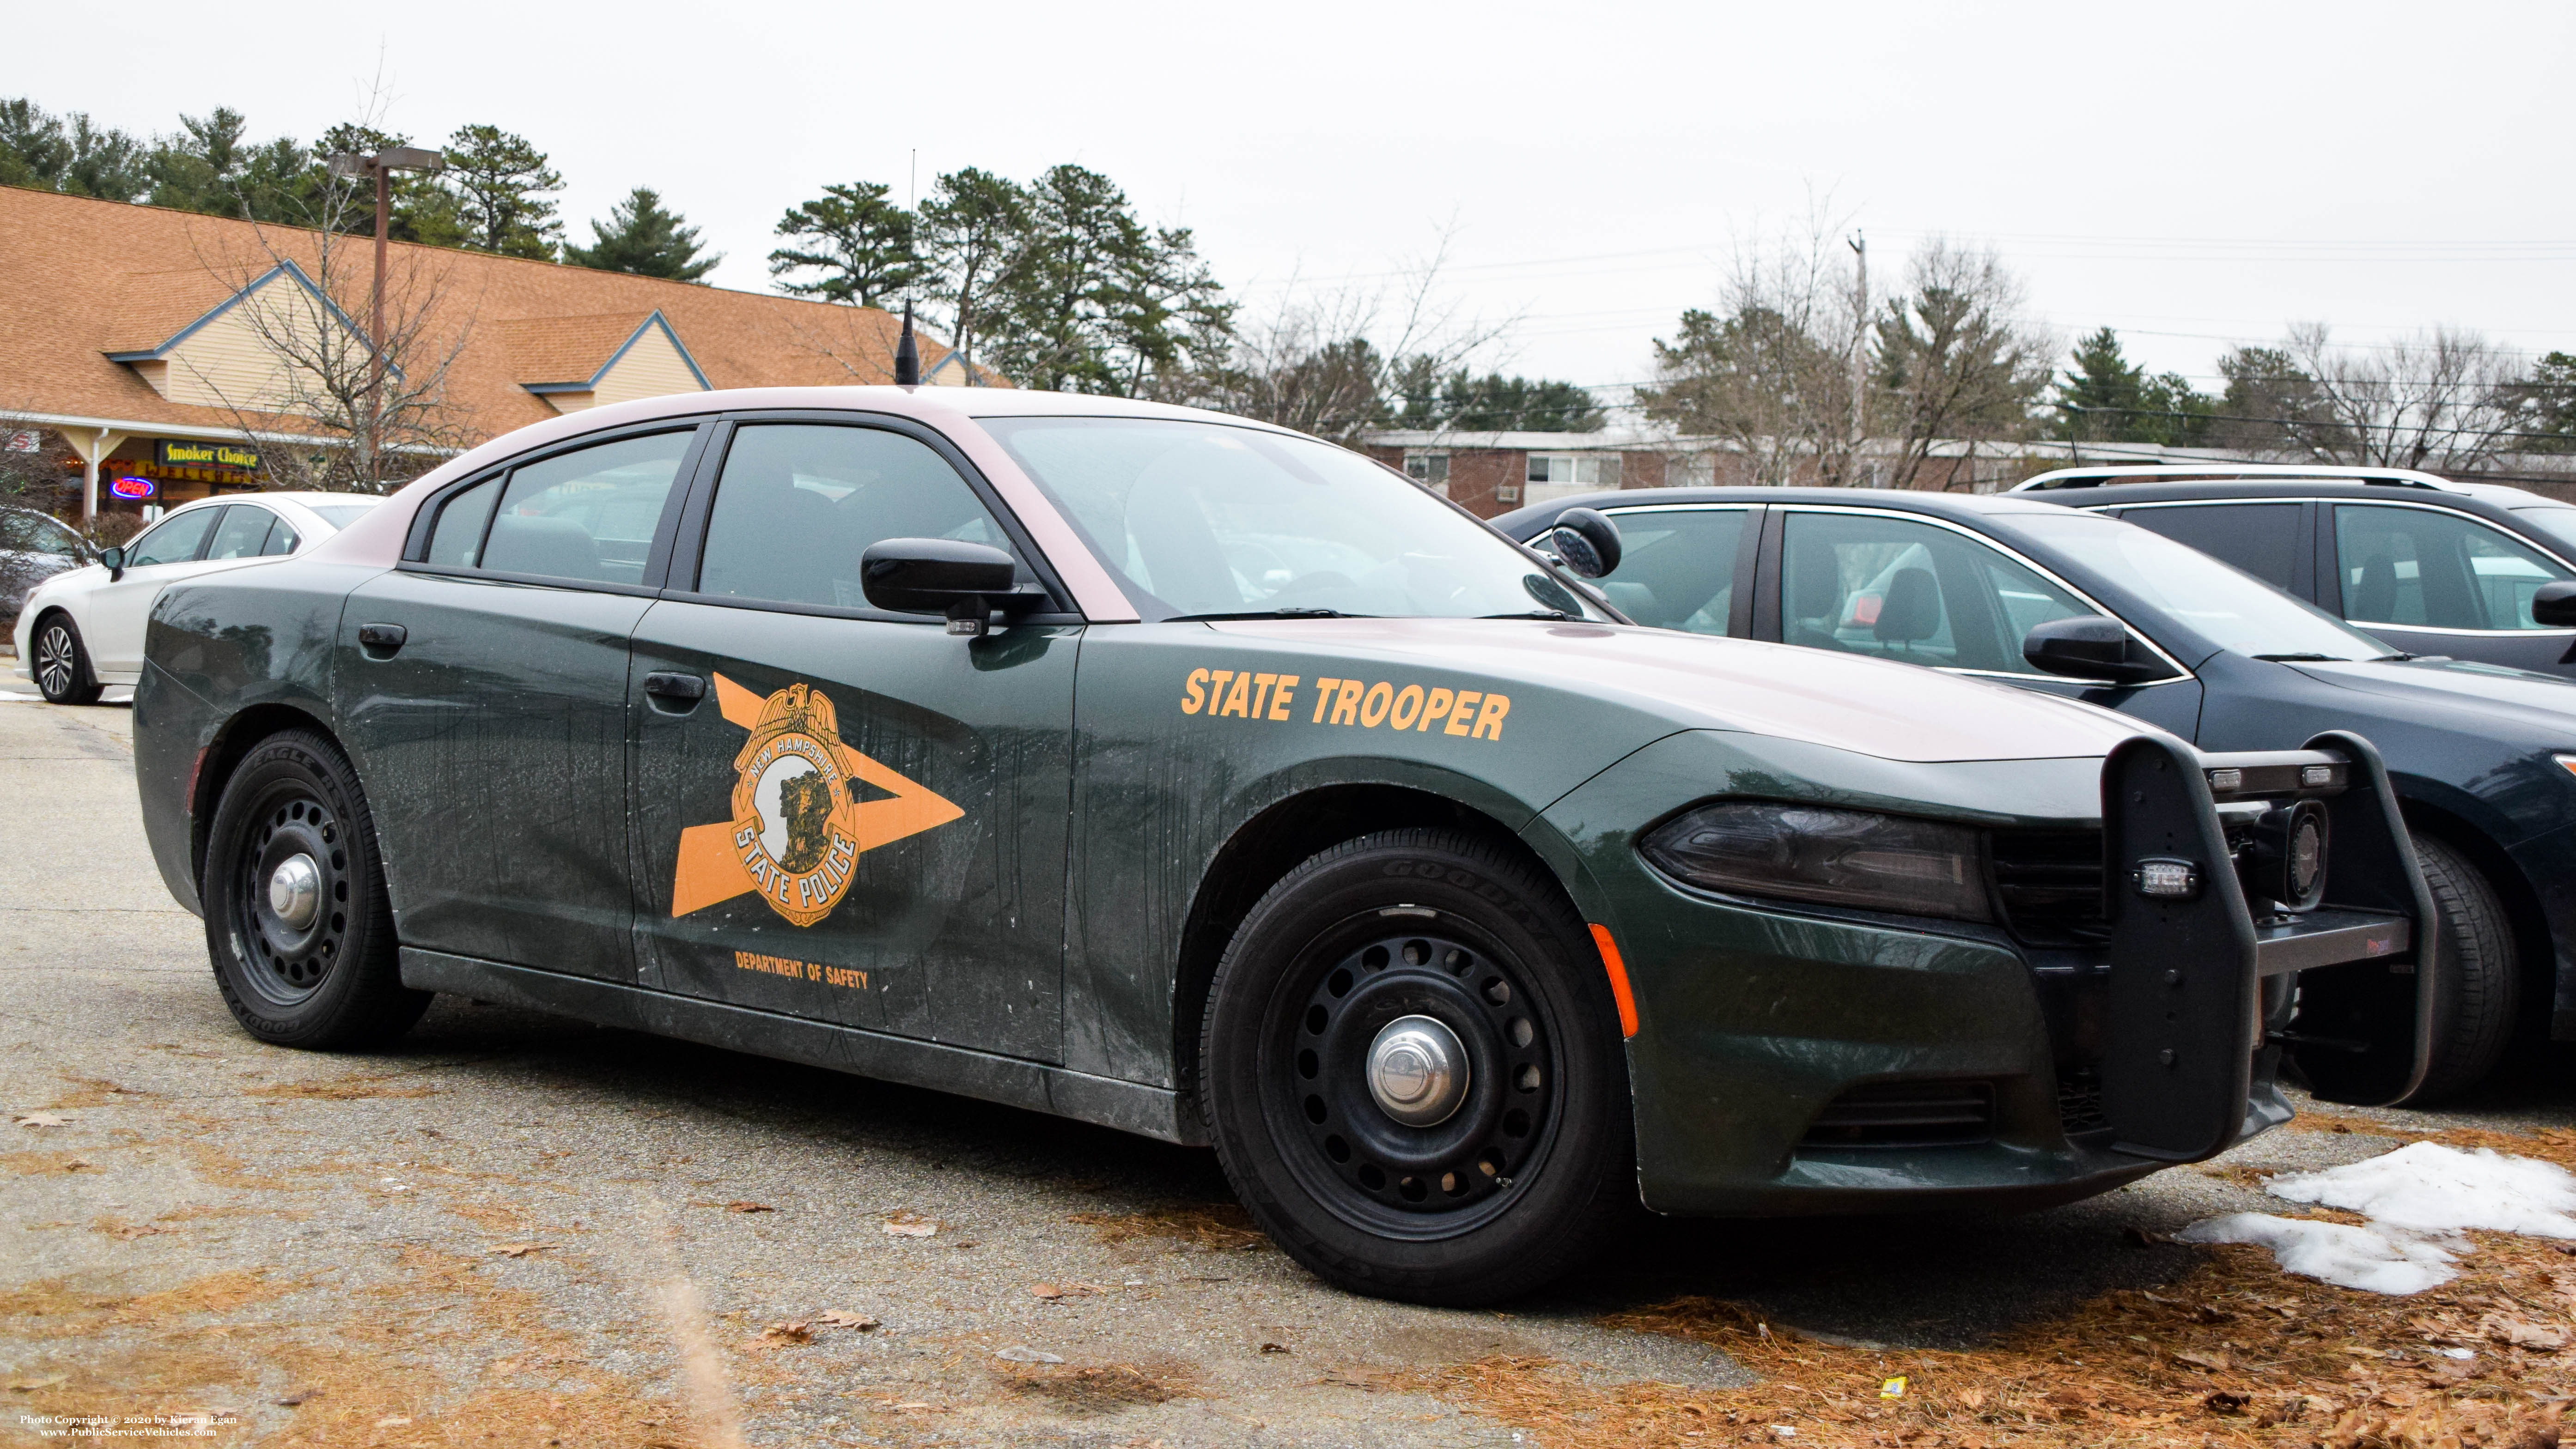 A photo  of New Hampshire State Police
            Cruiser 742, a 2018 Dodge Charger             taken by Kieran Egan